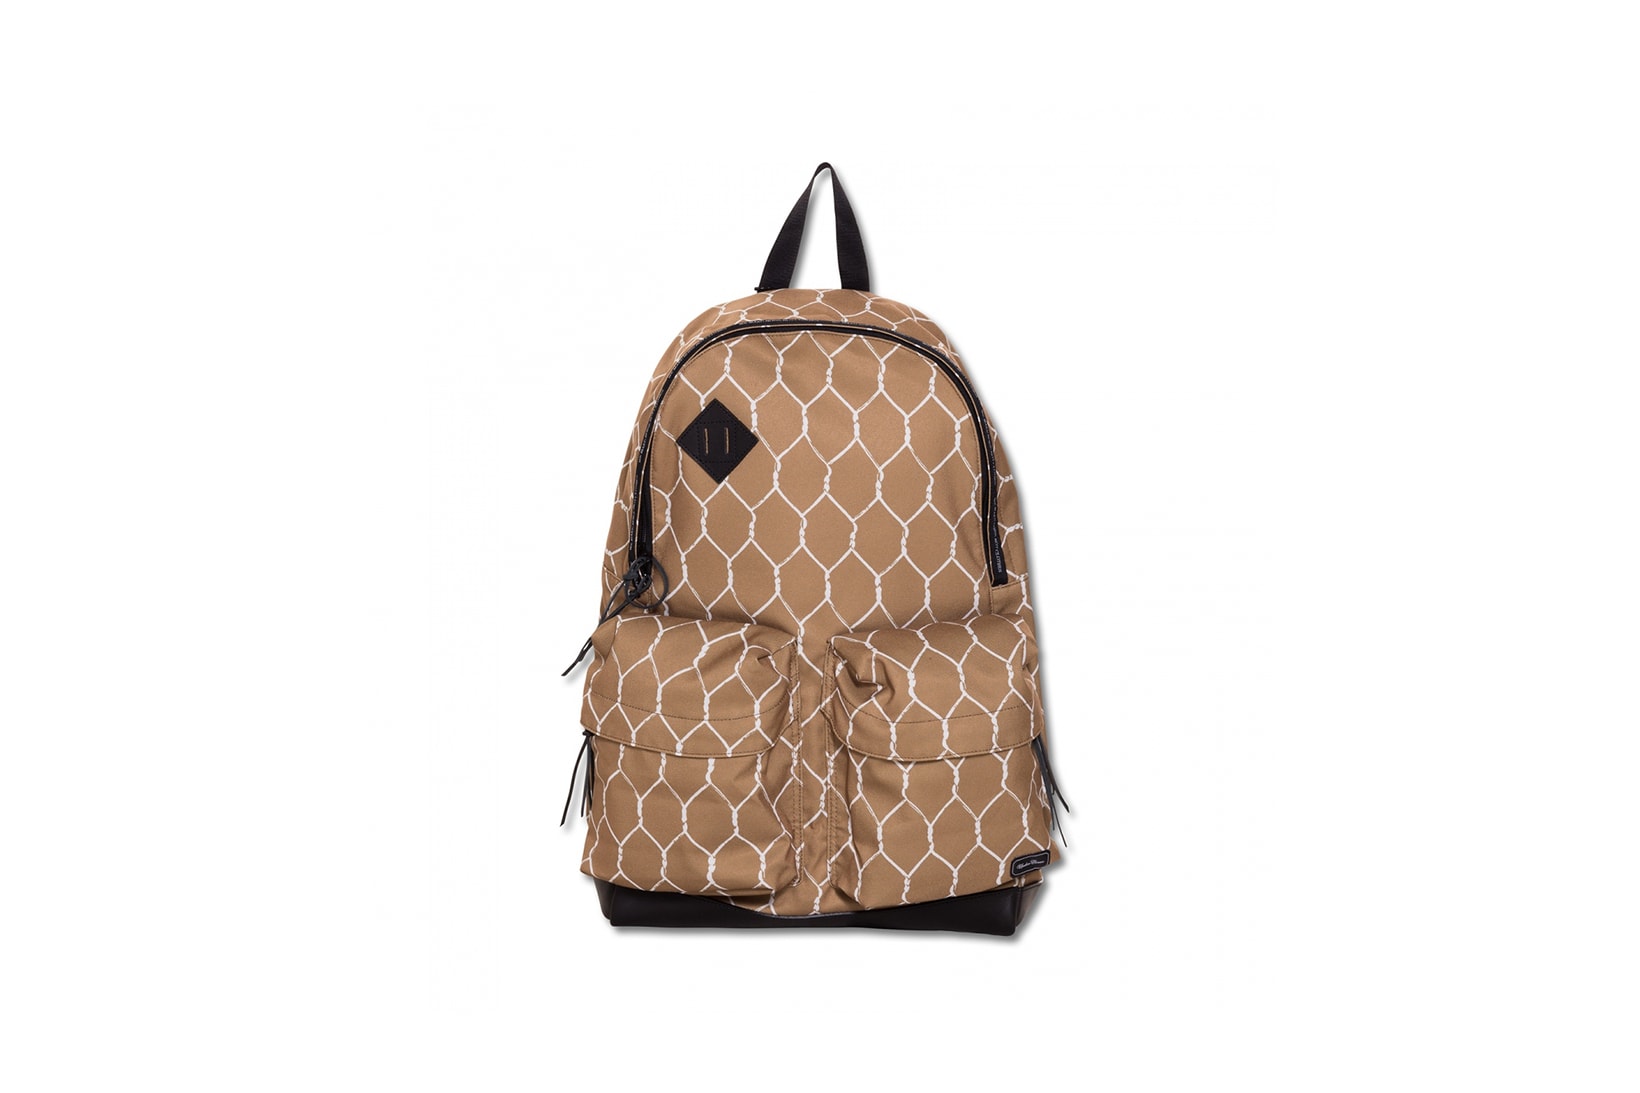 UNDERCOVER Chainlink Fence Backpack 2016 Fall Winter